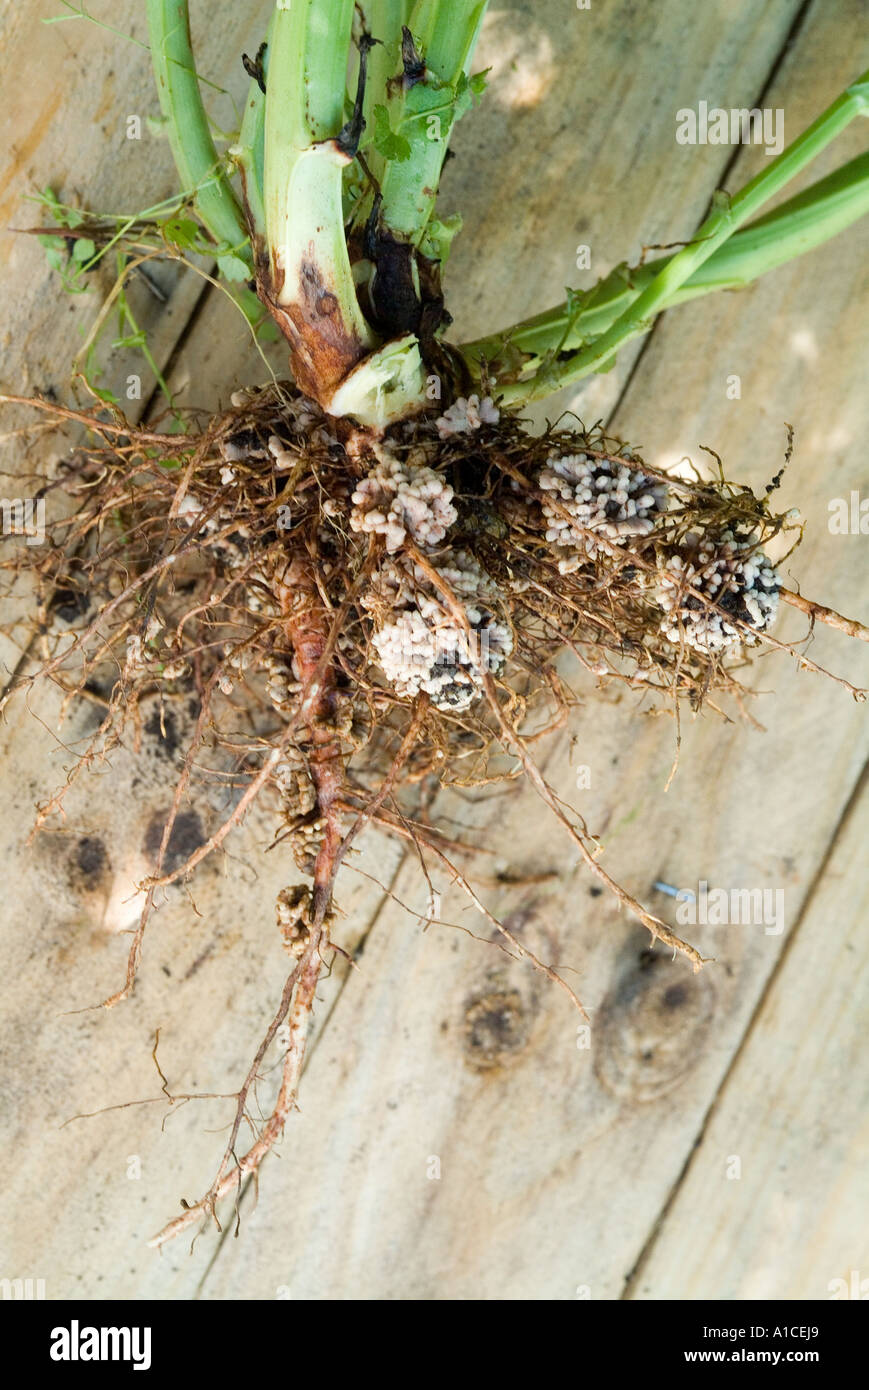 Nitrogen nodules on the root of a broad bean plant Stock Photo